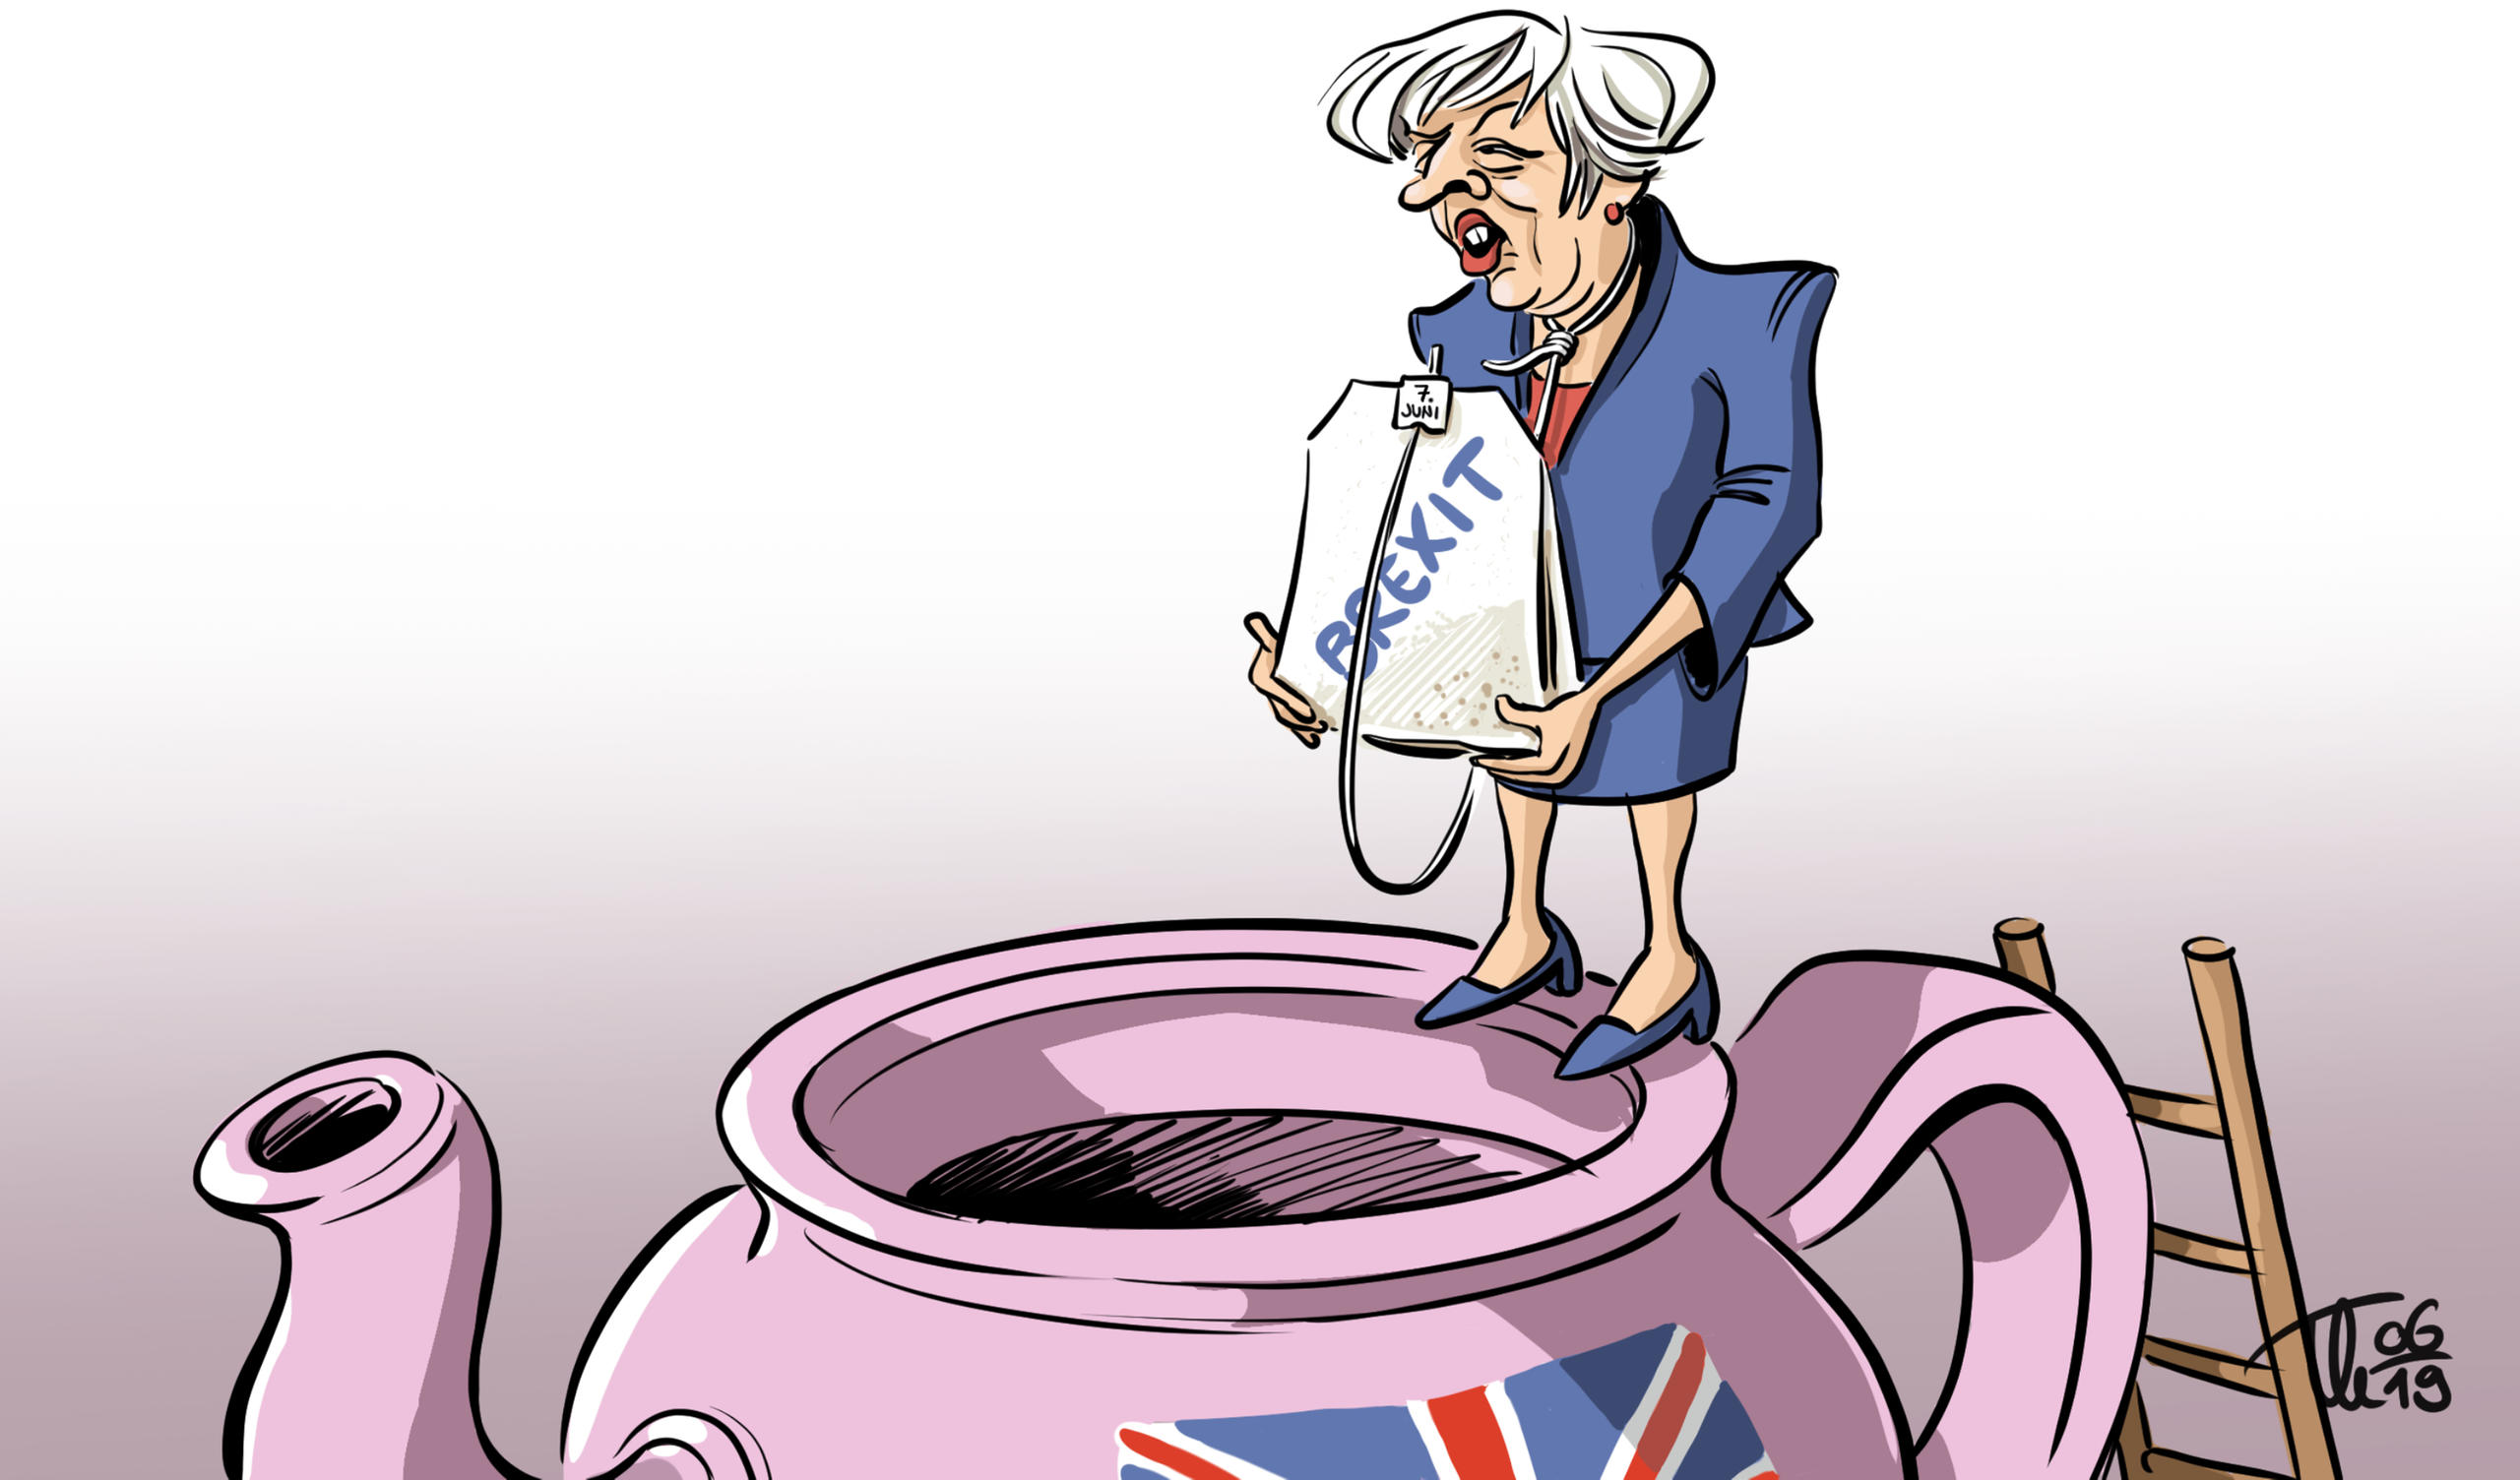 Theresa May standing on a teapot